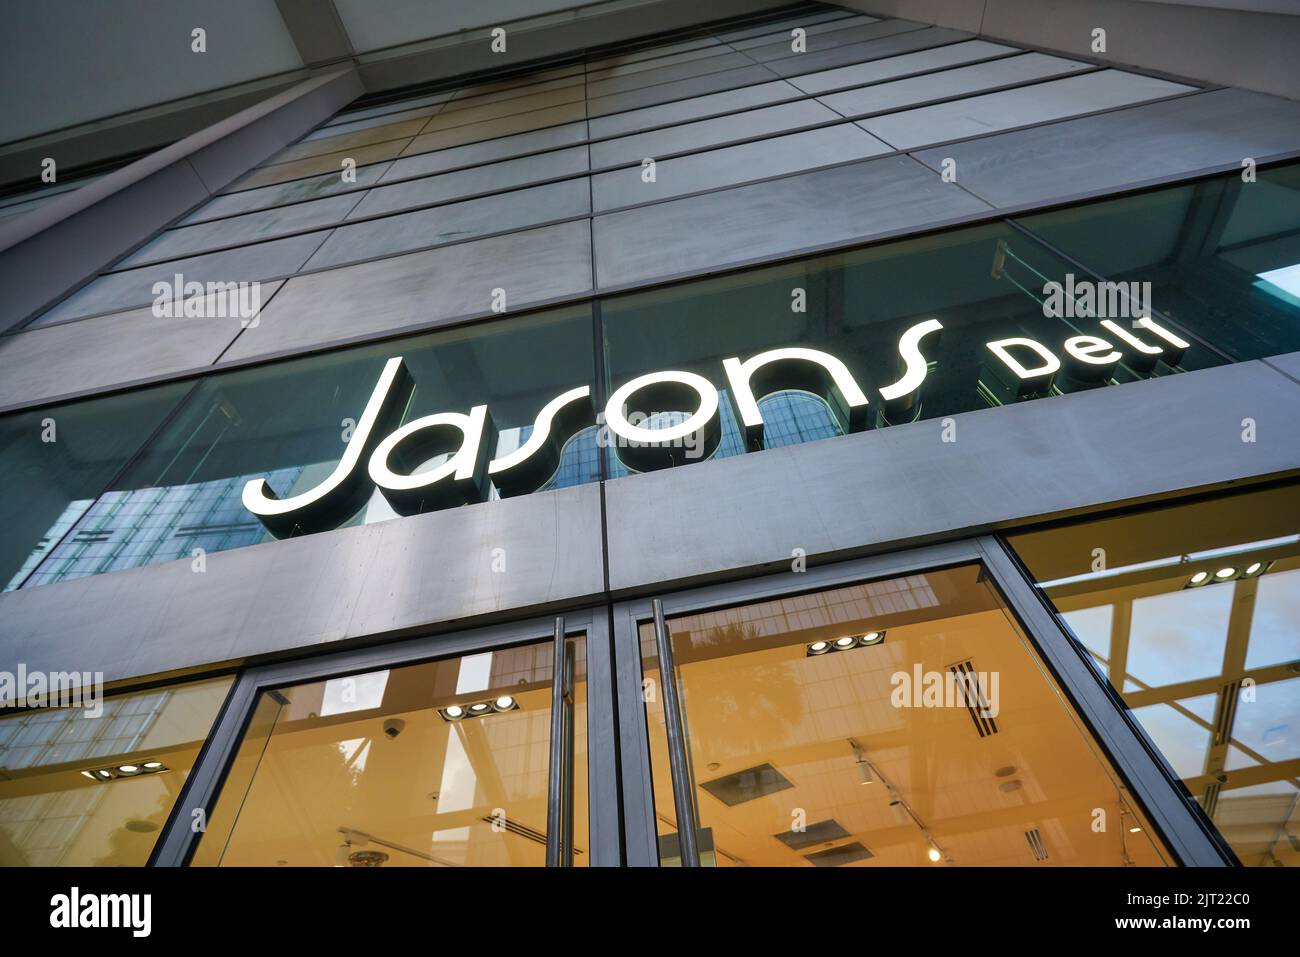 SINGAPORE - JANUARY 20, 2020: Jasons Deli sign over a store entrance in the Shoppes at Marina Bay Sands. Jasons Deli is a supermarket and delicatessen Stock Photo